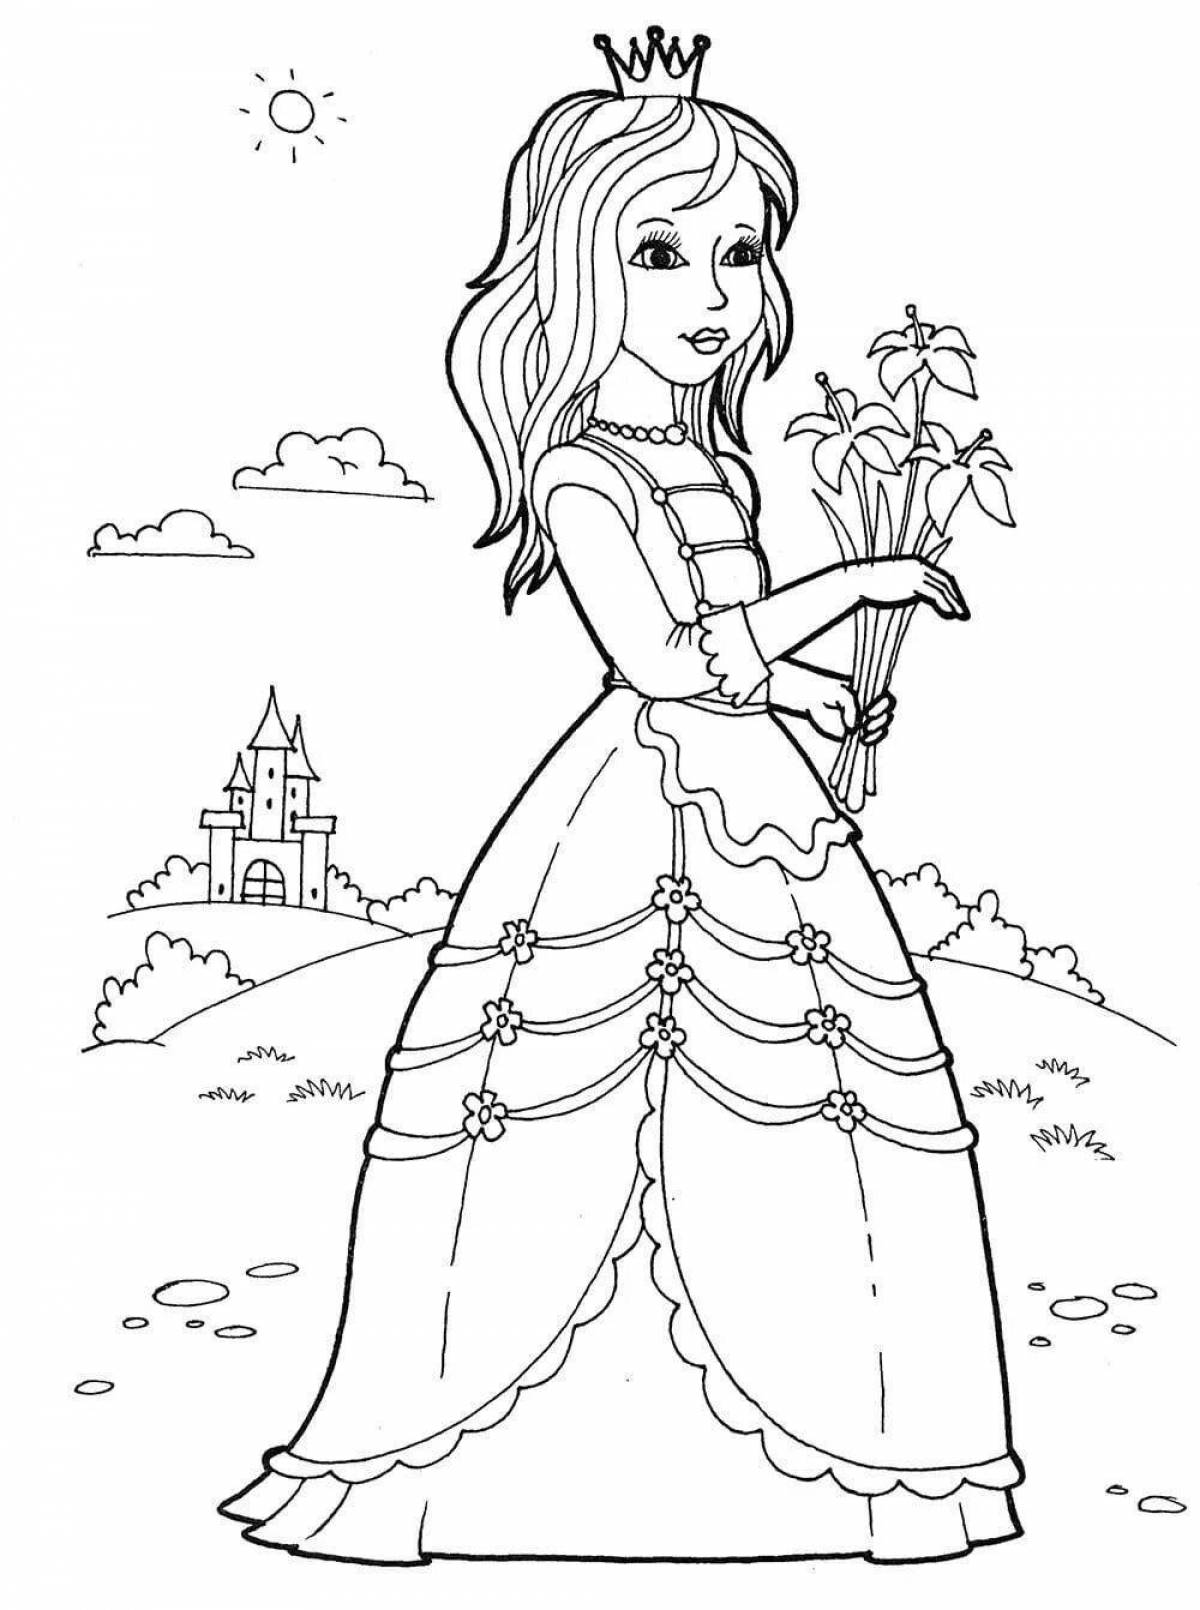 Gorgeous coloring book for children 5-6 years old for girls princess